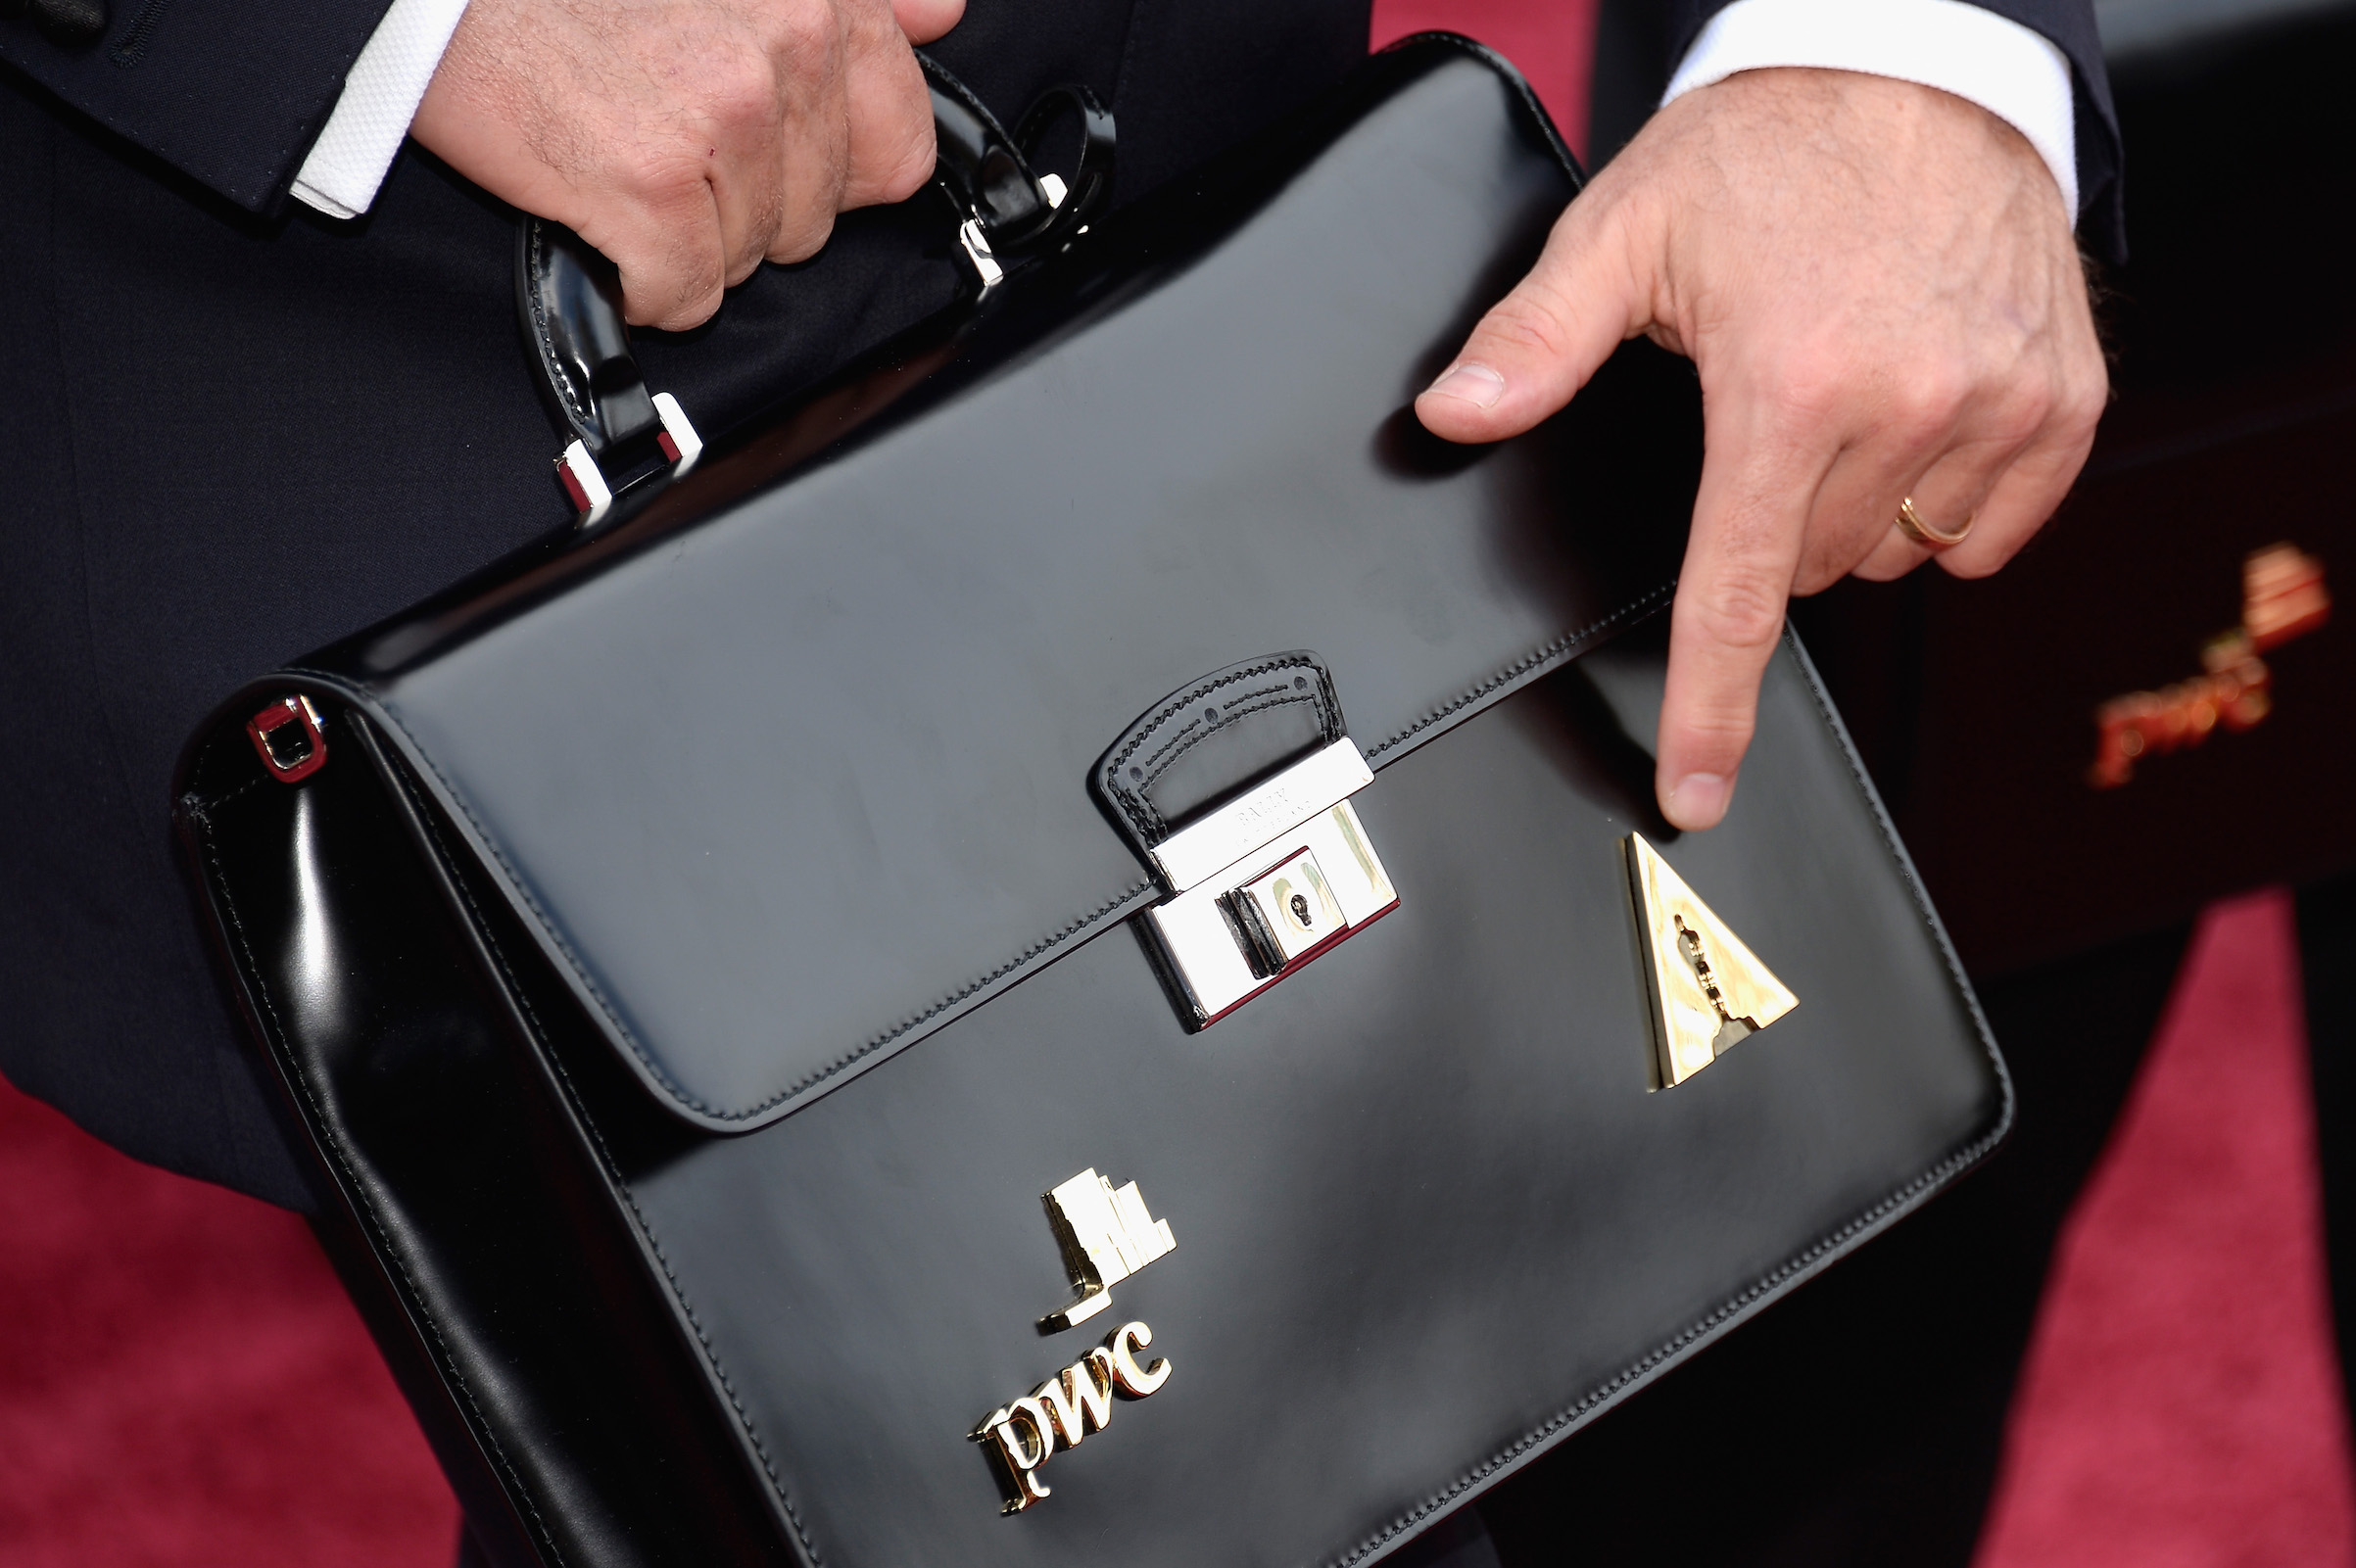 A PricewaterhouseCoopers representative (with a briefcase) attends the Oscars held on March 2, 2014 in Hollywood, Calif. (Kevork Djansezian—Getty Images)